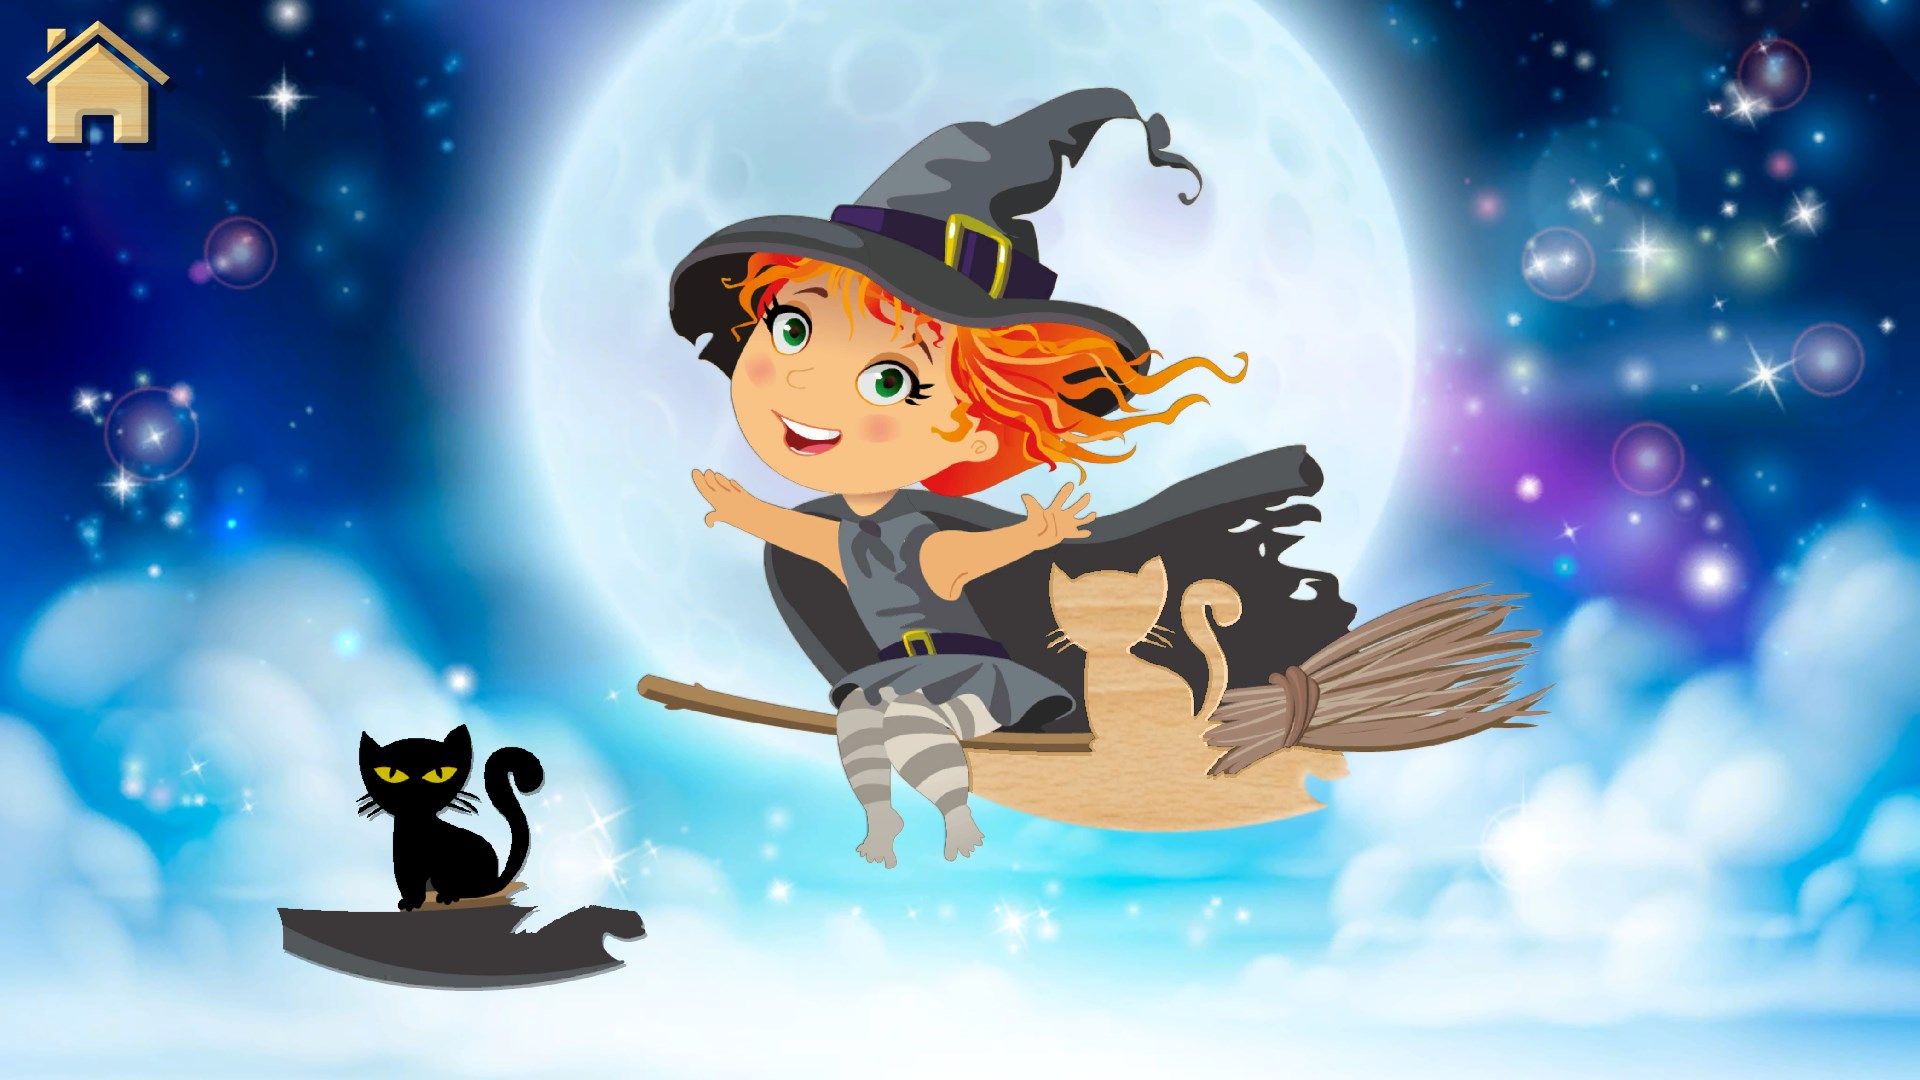 Halloween Puzzle Game for Kids